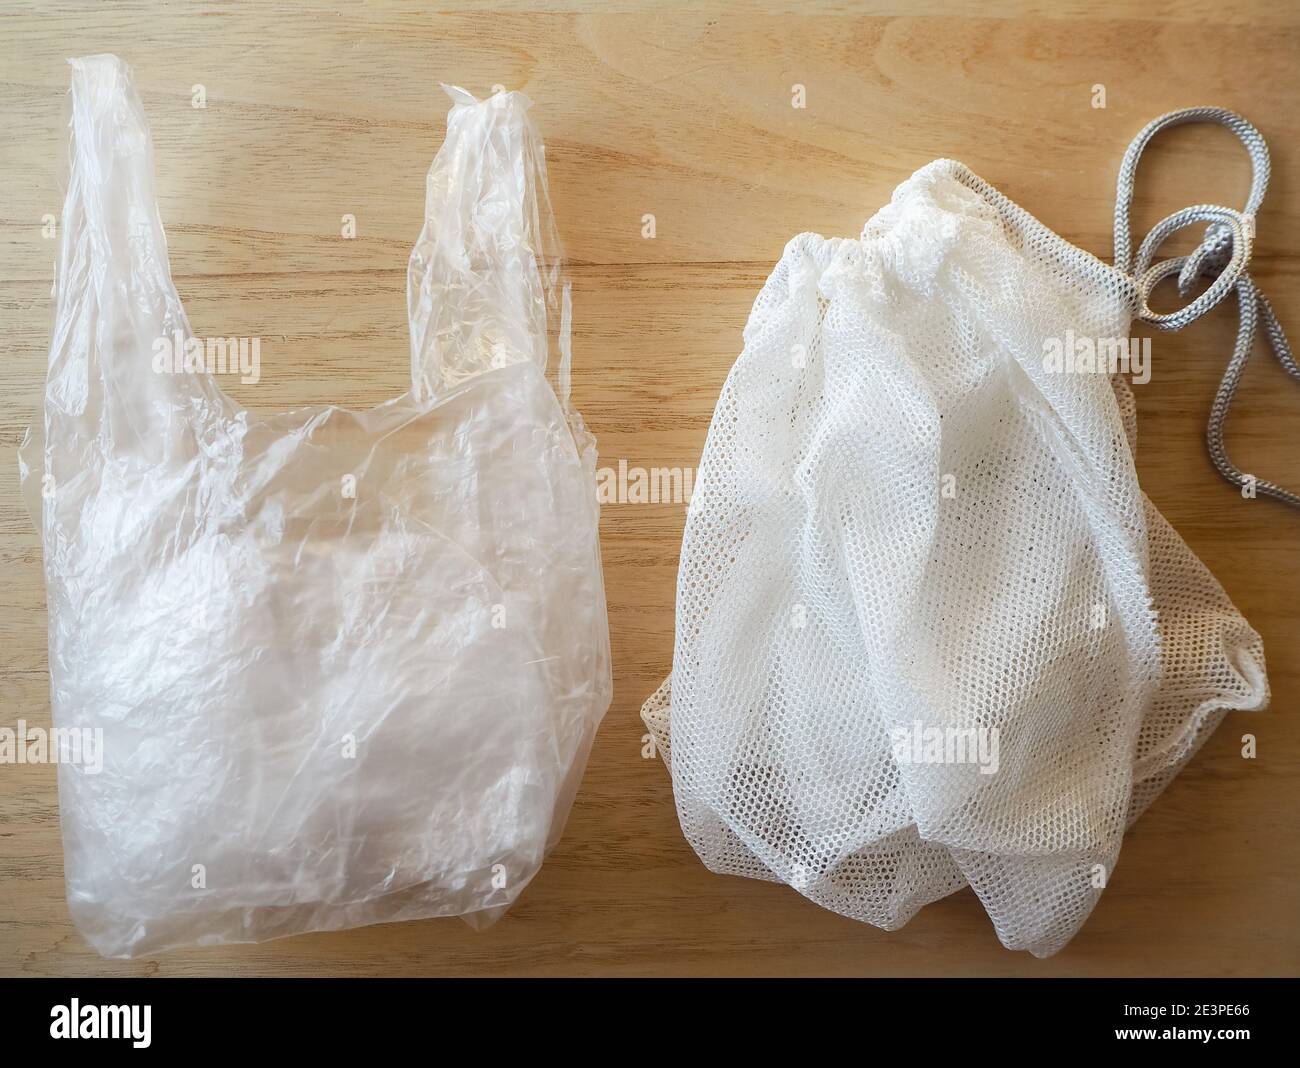 Single-use plastic bag and reusable vegetable bag as a sustainable solution on a wooden background. EU single-use plastic ban concept. Stock Photo